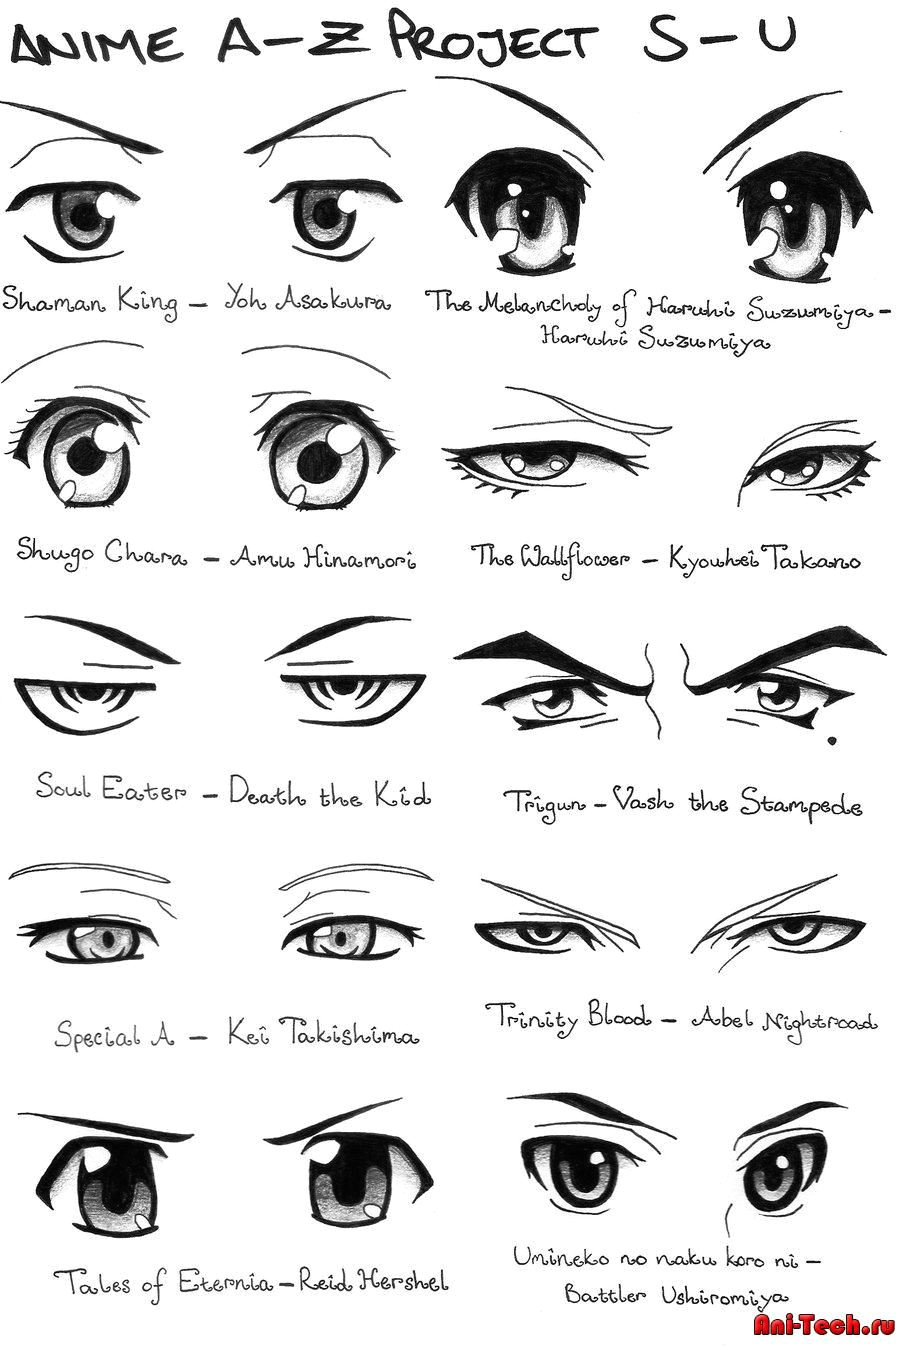 Drawings Of Eyes Anime Pin by Maria Polischuk On N D N N Dµd Don D N Dod D D D D D D D Drawings Anime